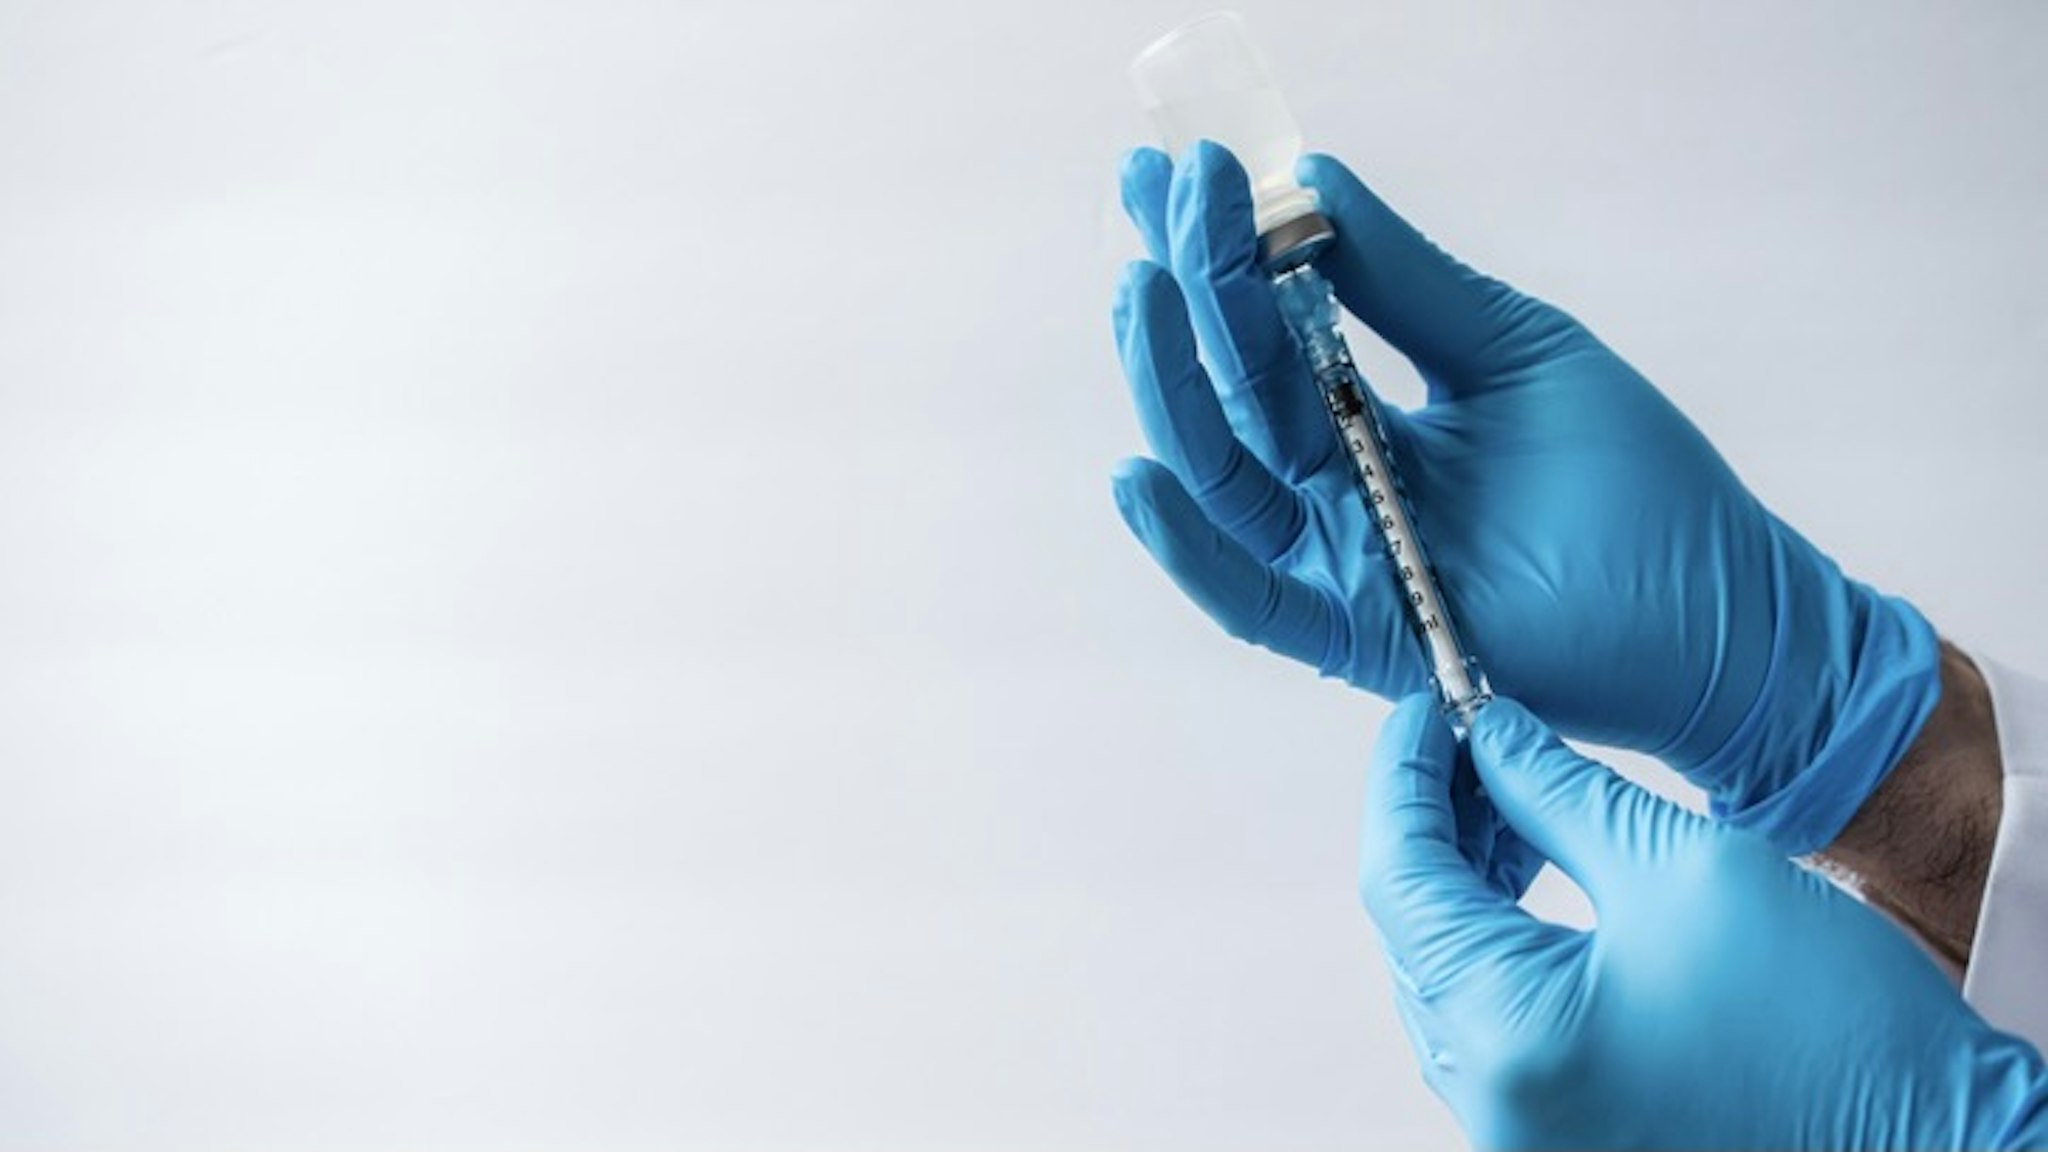 Hands in gloves drawing vaccine into syringe on white background. - stock photo Cavan Images/Getty Images